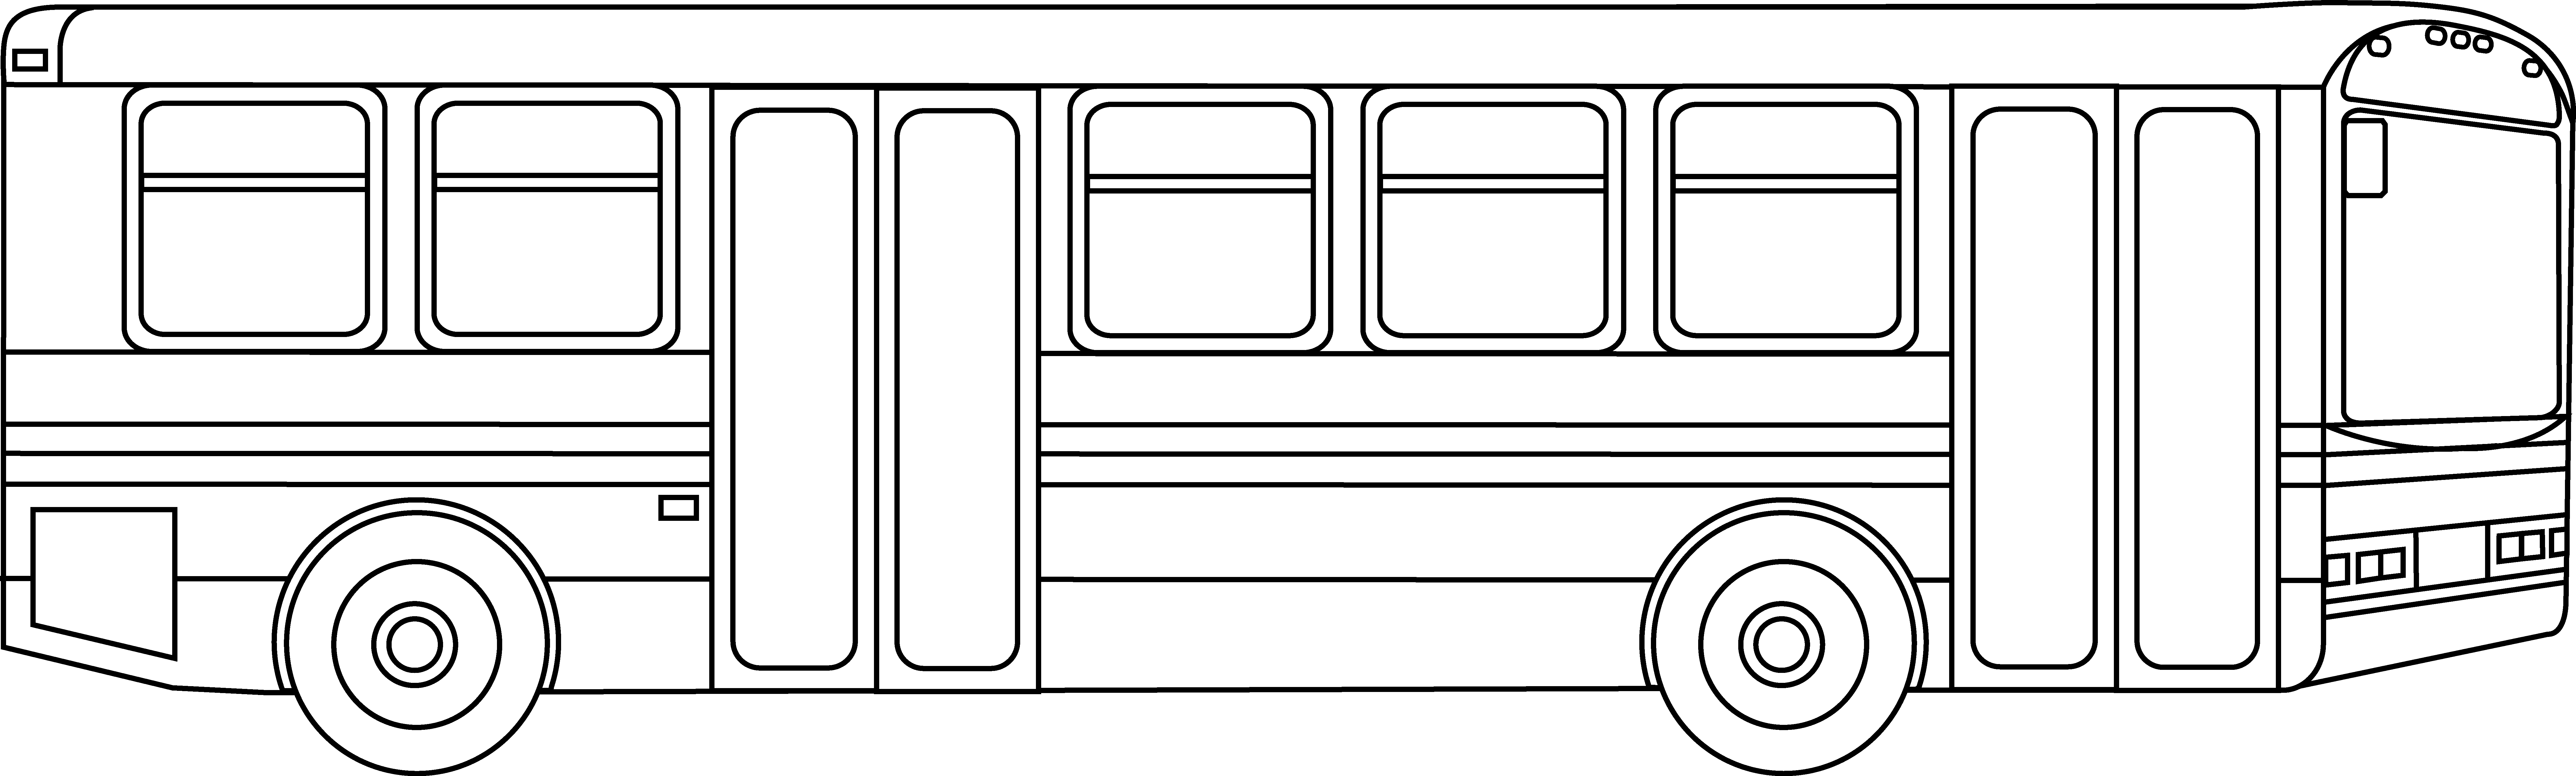 Free Pictures Of Buses, Download Free Pictures Of Buses png images